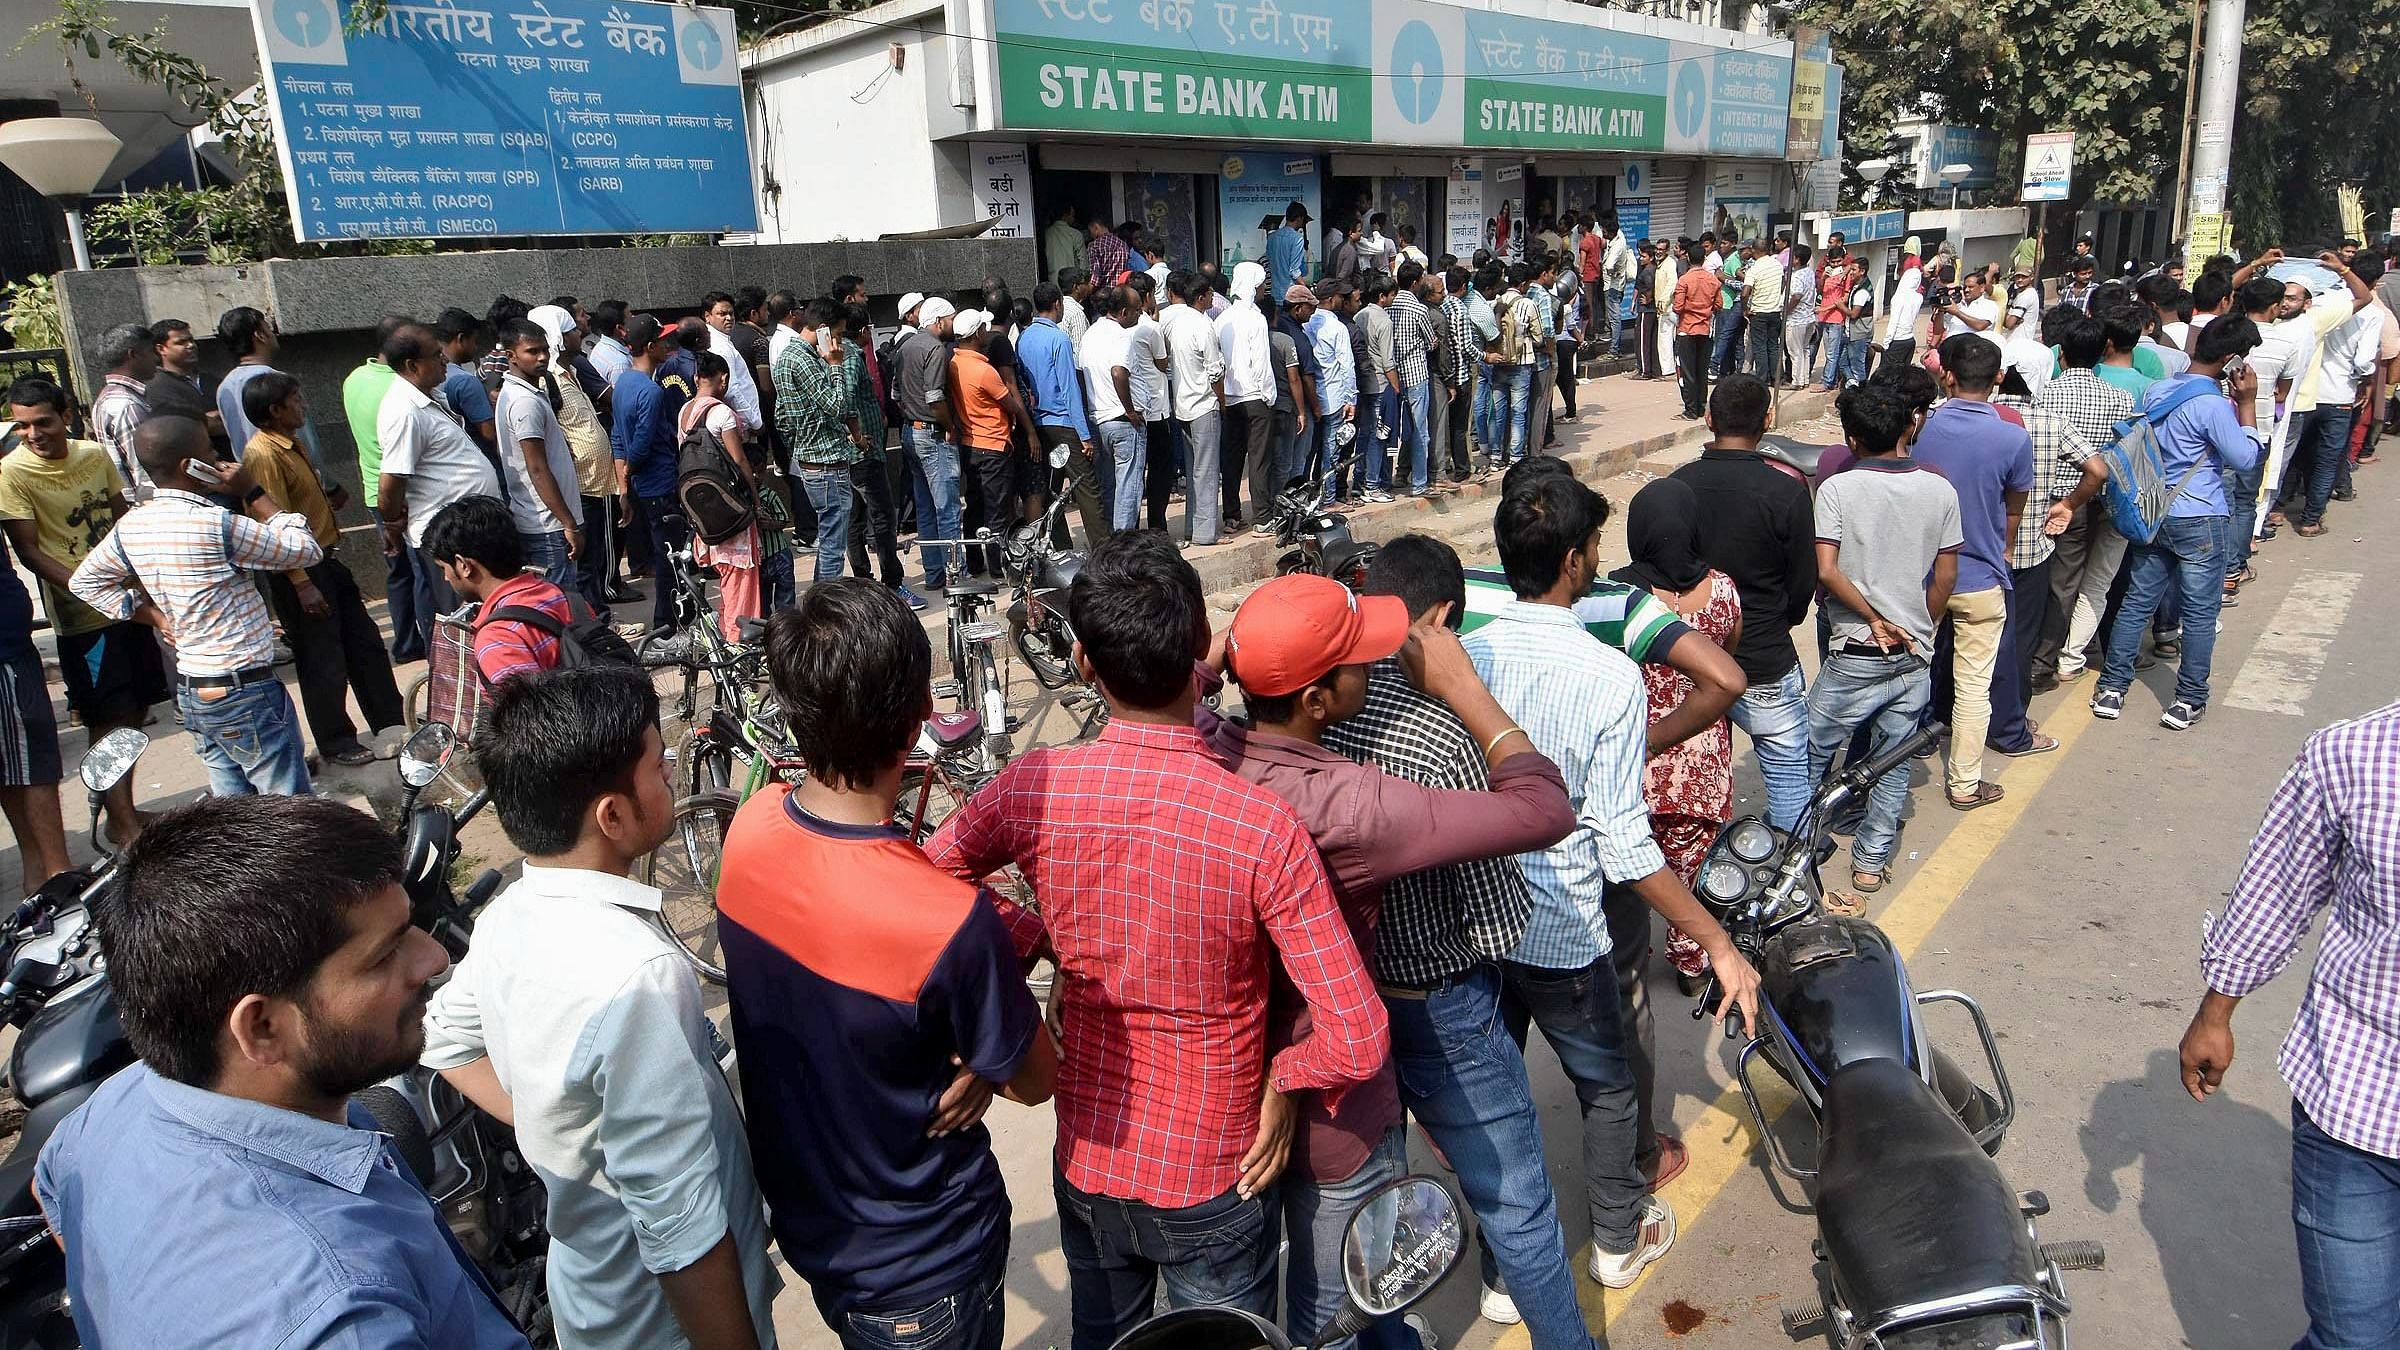 People queue up at an ATM in Patna on Nov. 12, 2016. Credit: PTI File Photo